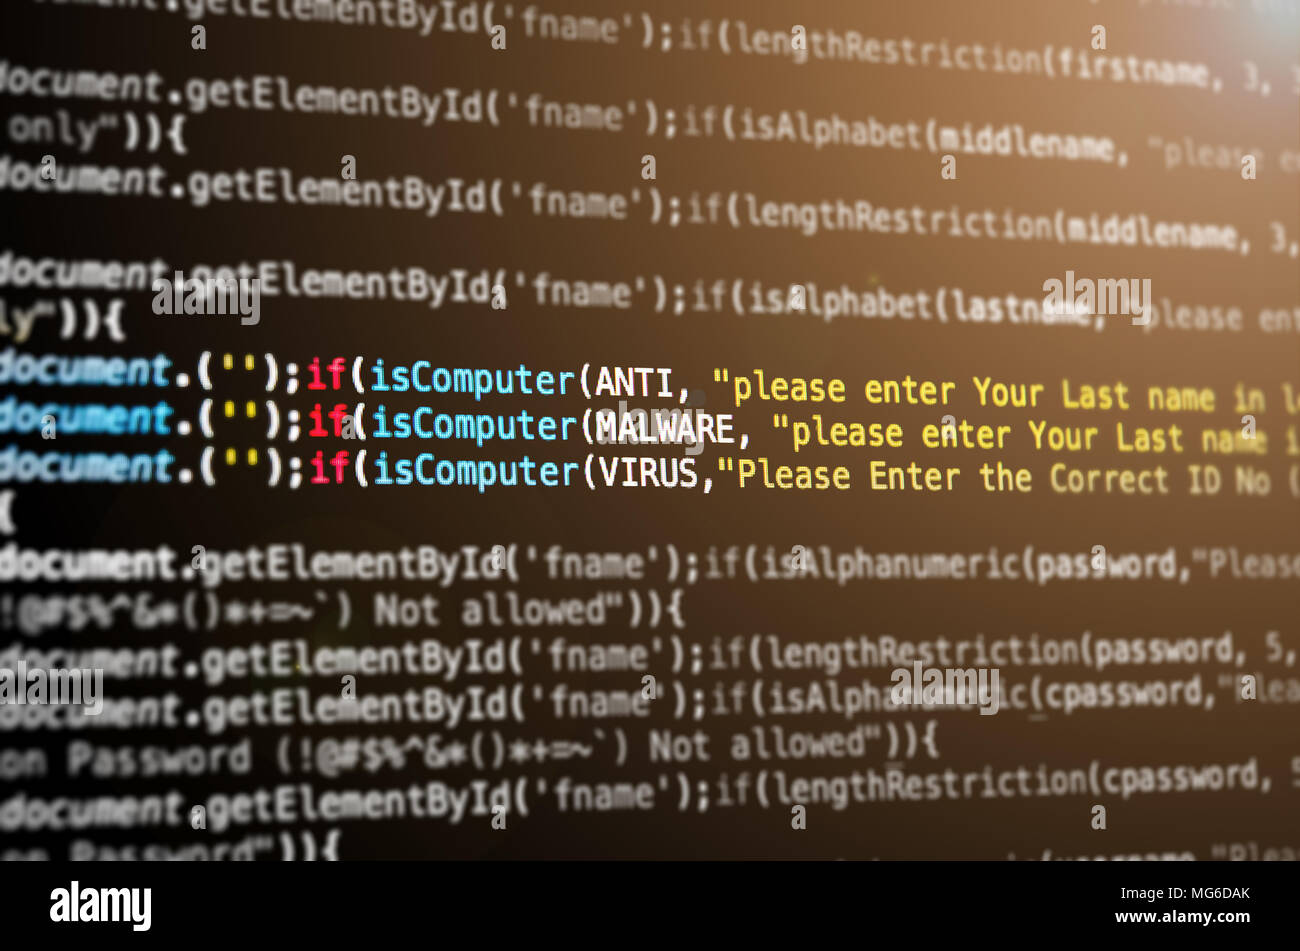 Desktop Source Code And Technology Background, Developer Or Programer With  Coding And Programming, Wallpaper By Computer Language And Source Code,  Computer Virus And Malware Attack. Stock Photo, Picture and Royalty Free  Image.